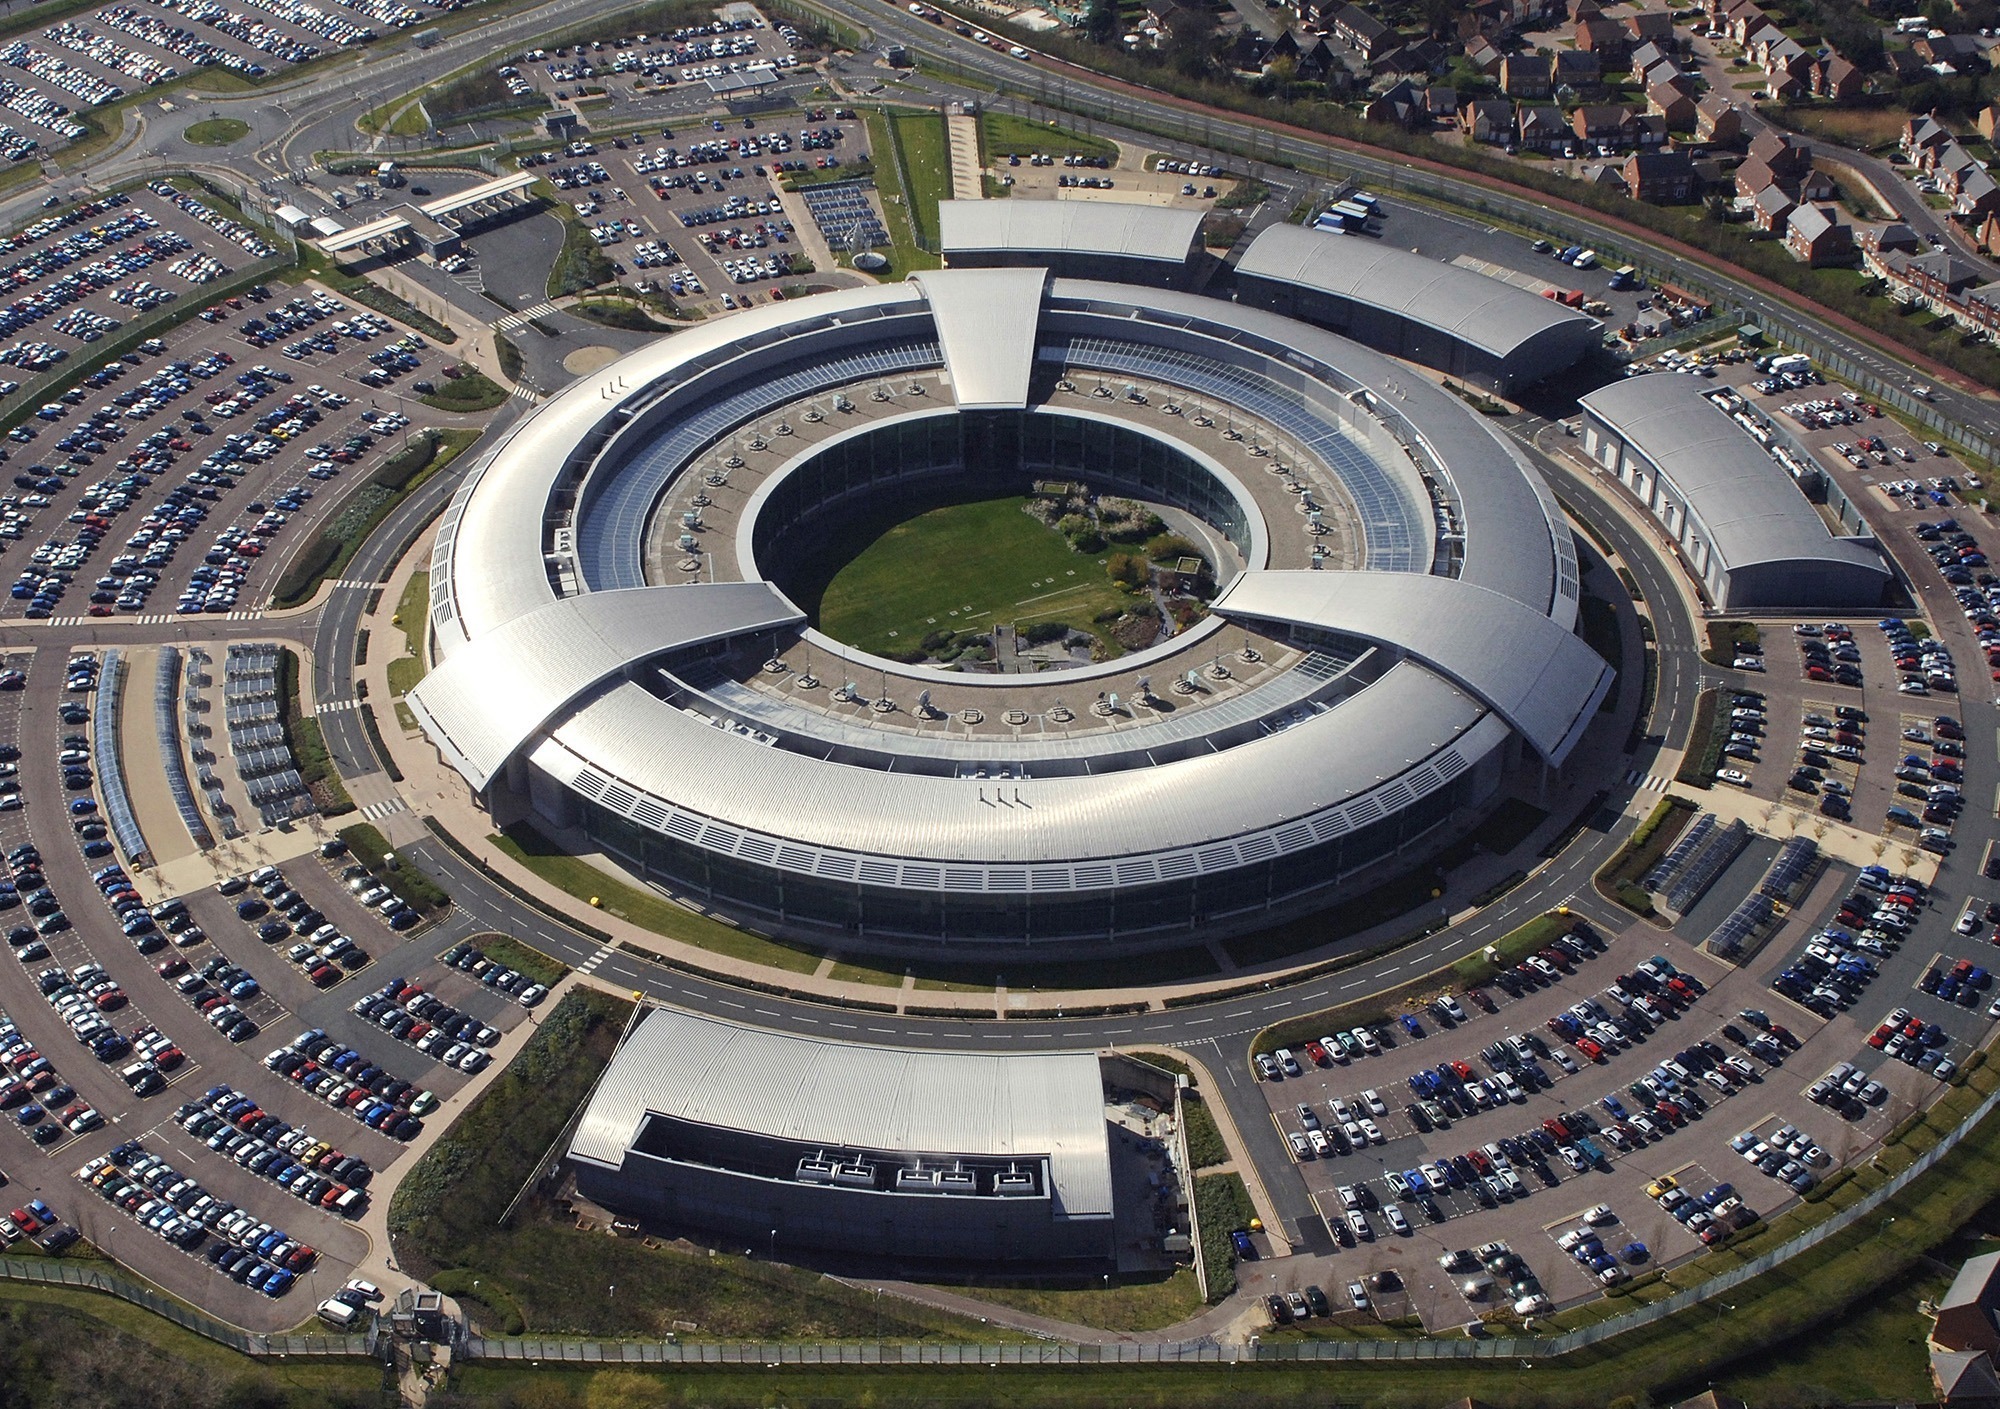 Exclusive: Declassified UK blacklisted by GCHQ, Britain’s largest intelligence agency